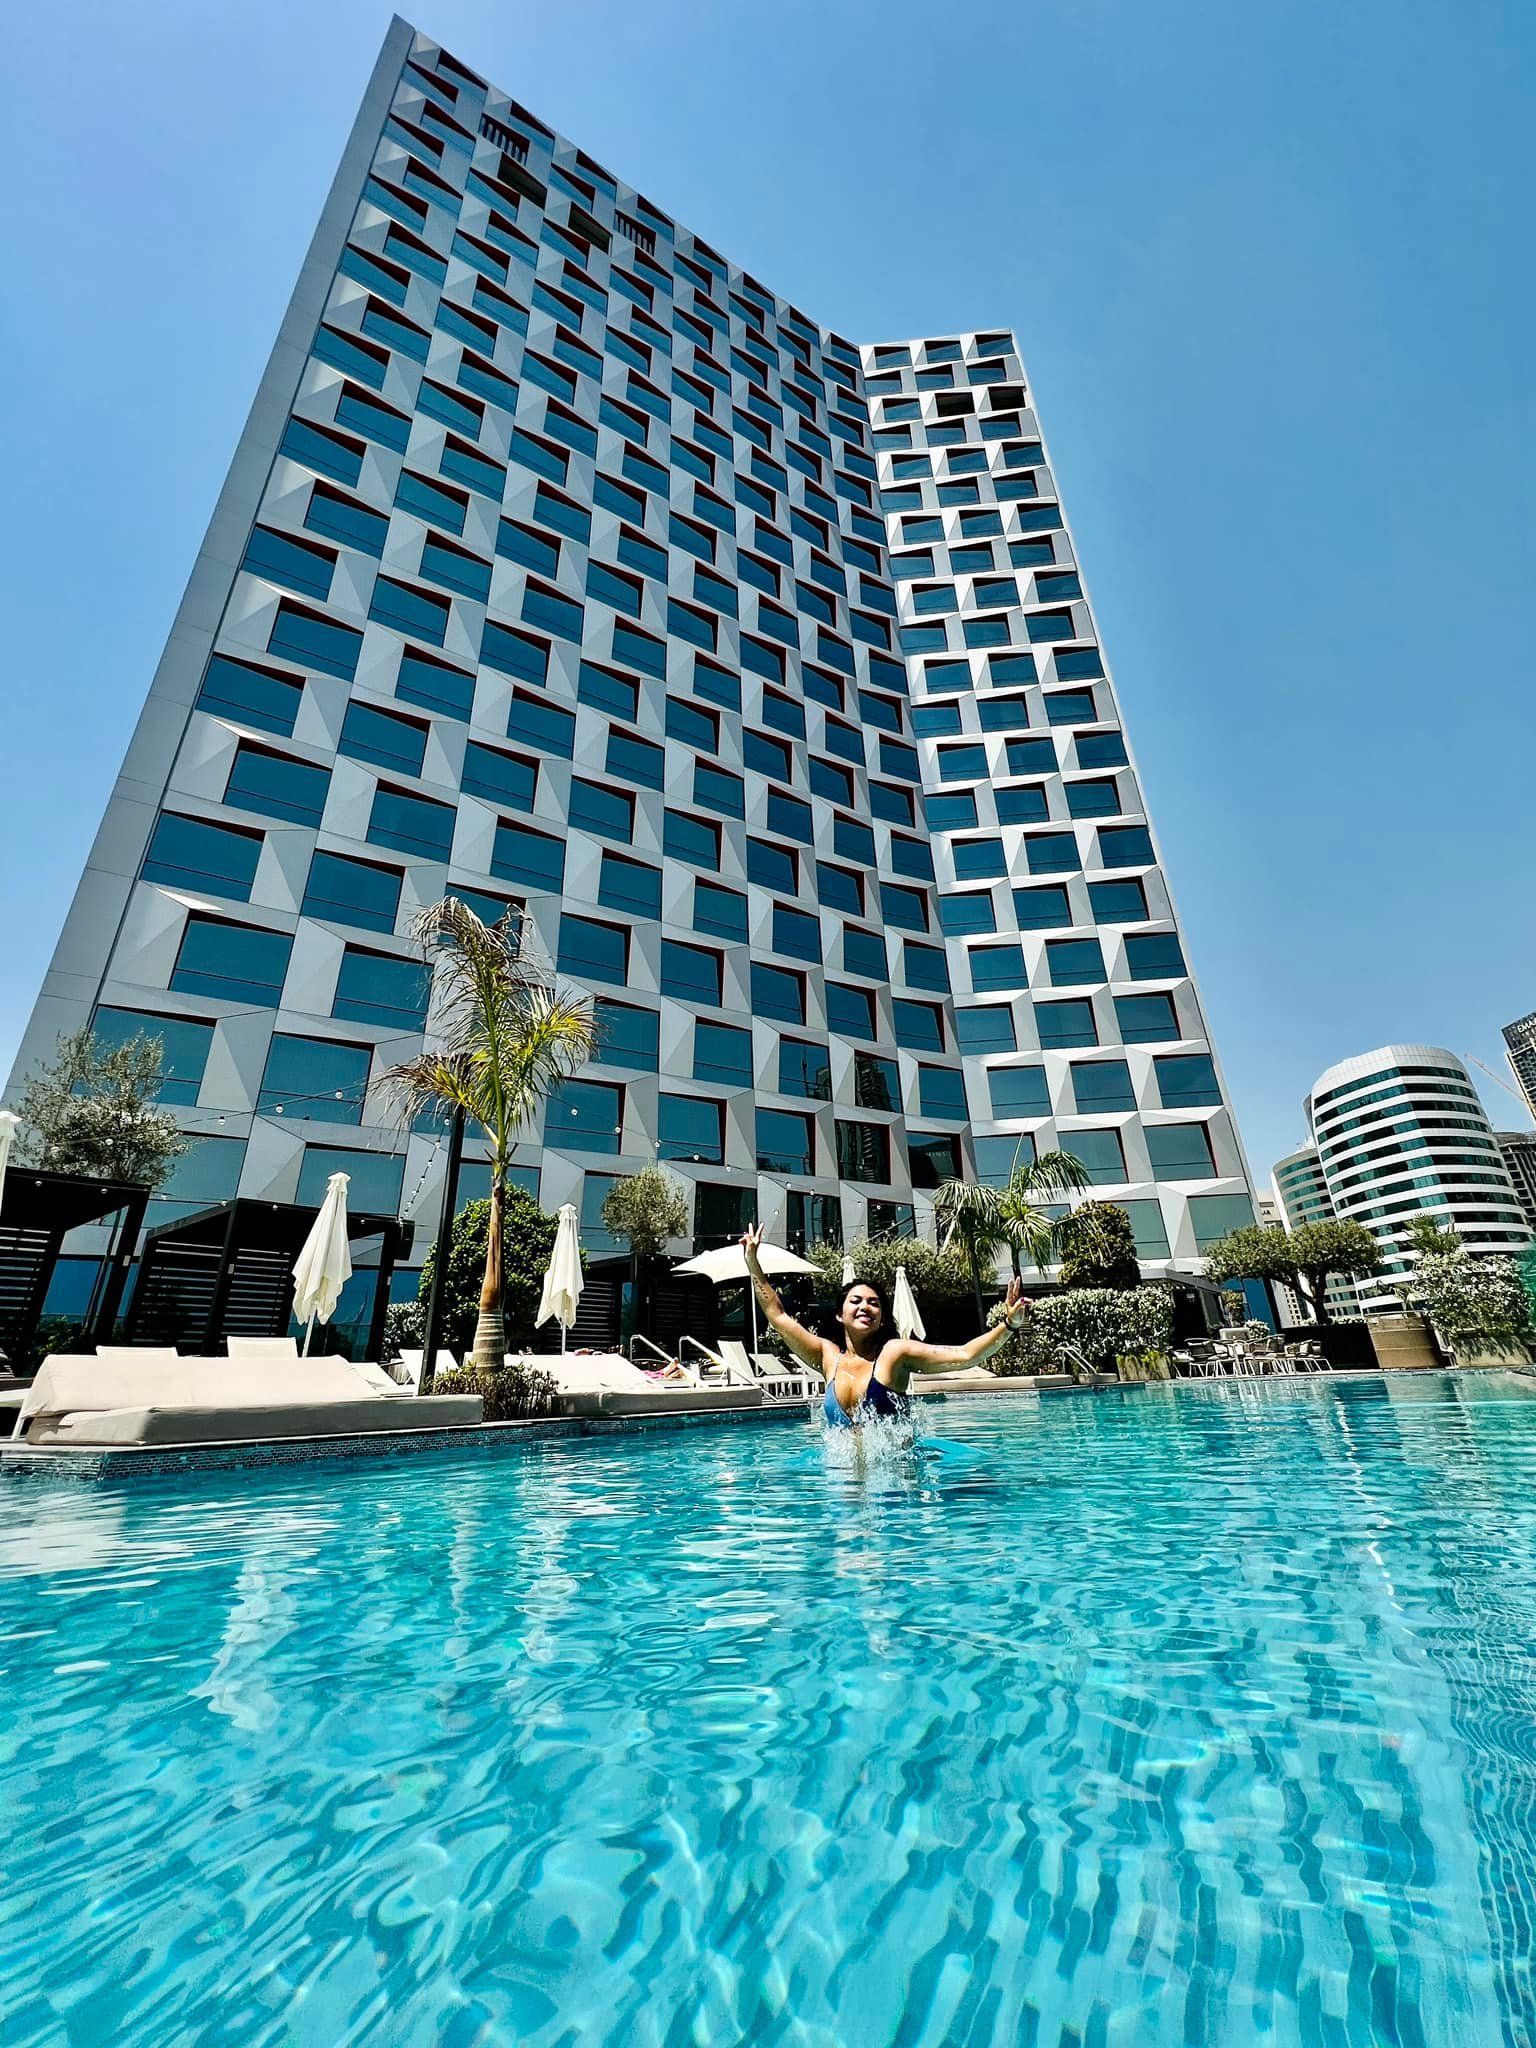 Hotel Indigo Dubai Downtown The first 5 to start is the Boutique Hotel in Dubai